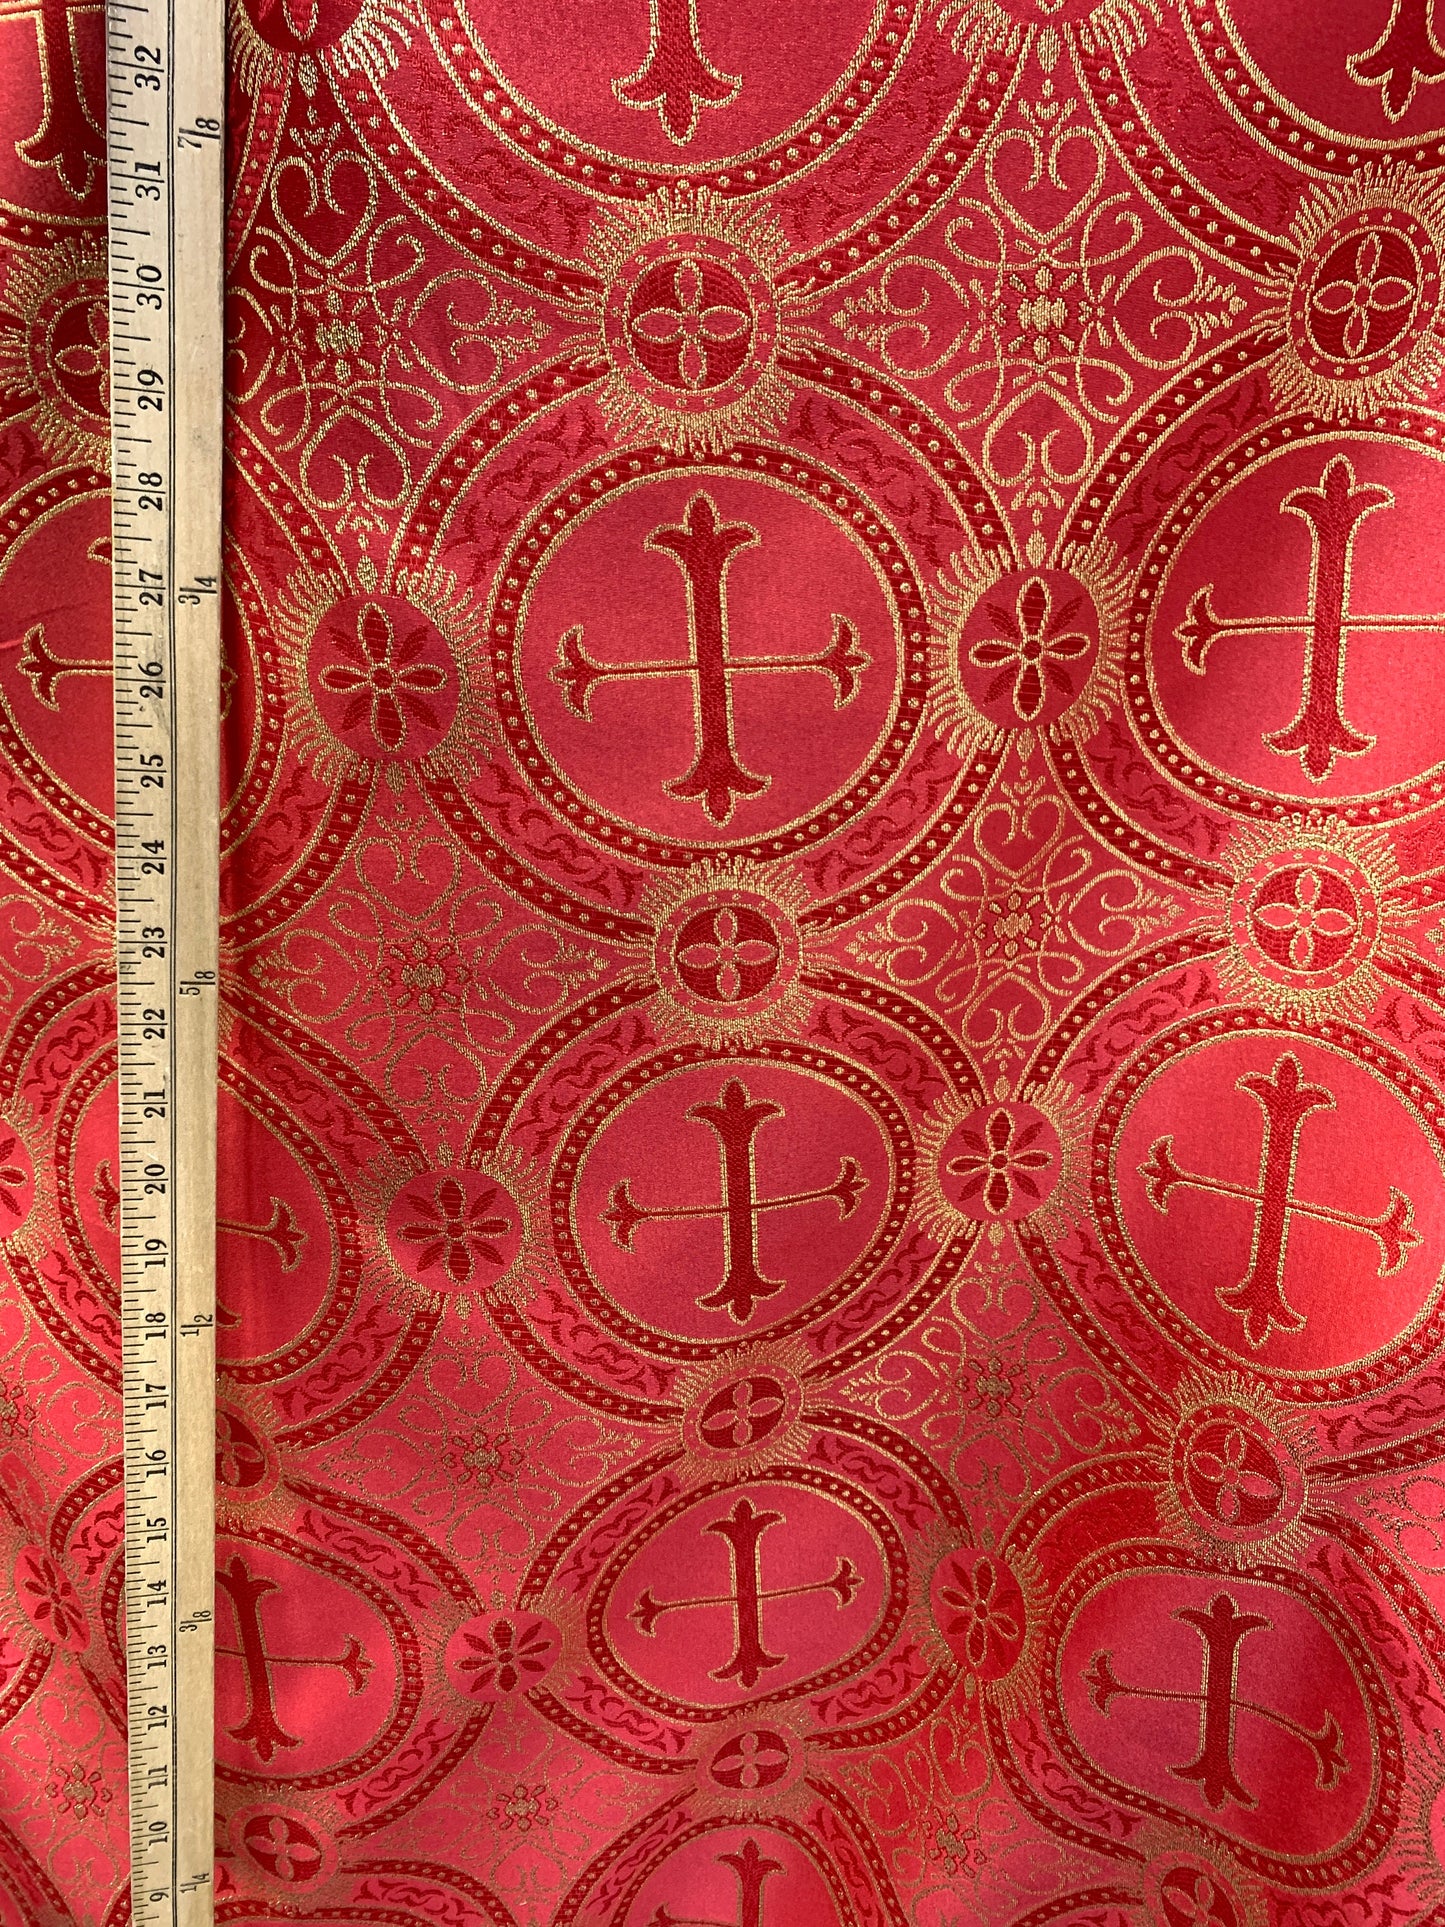 RED GOLD Metallic Liturgical Cross Brocade Fabric (55 in.) Sold By The Yard